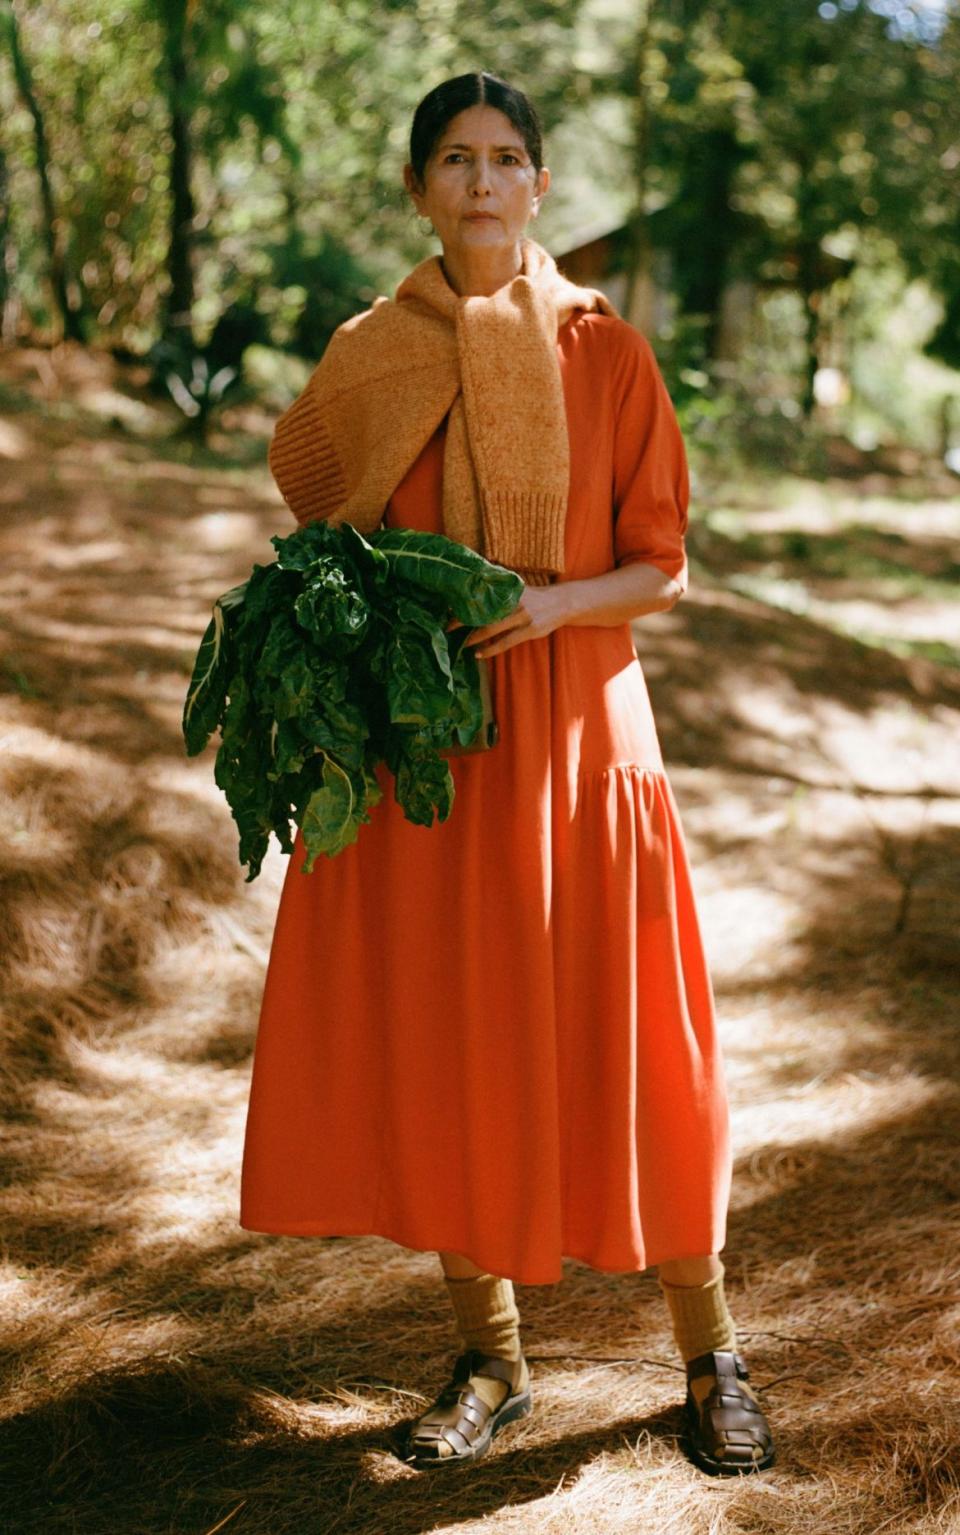 Woman in orange linen dress holding a large cabbage